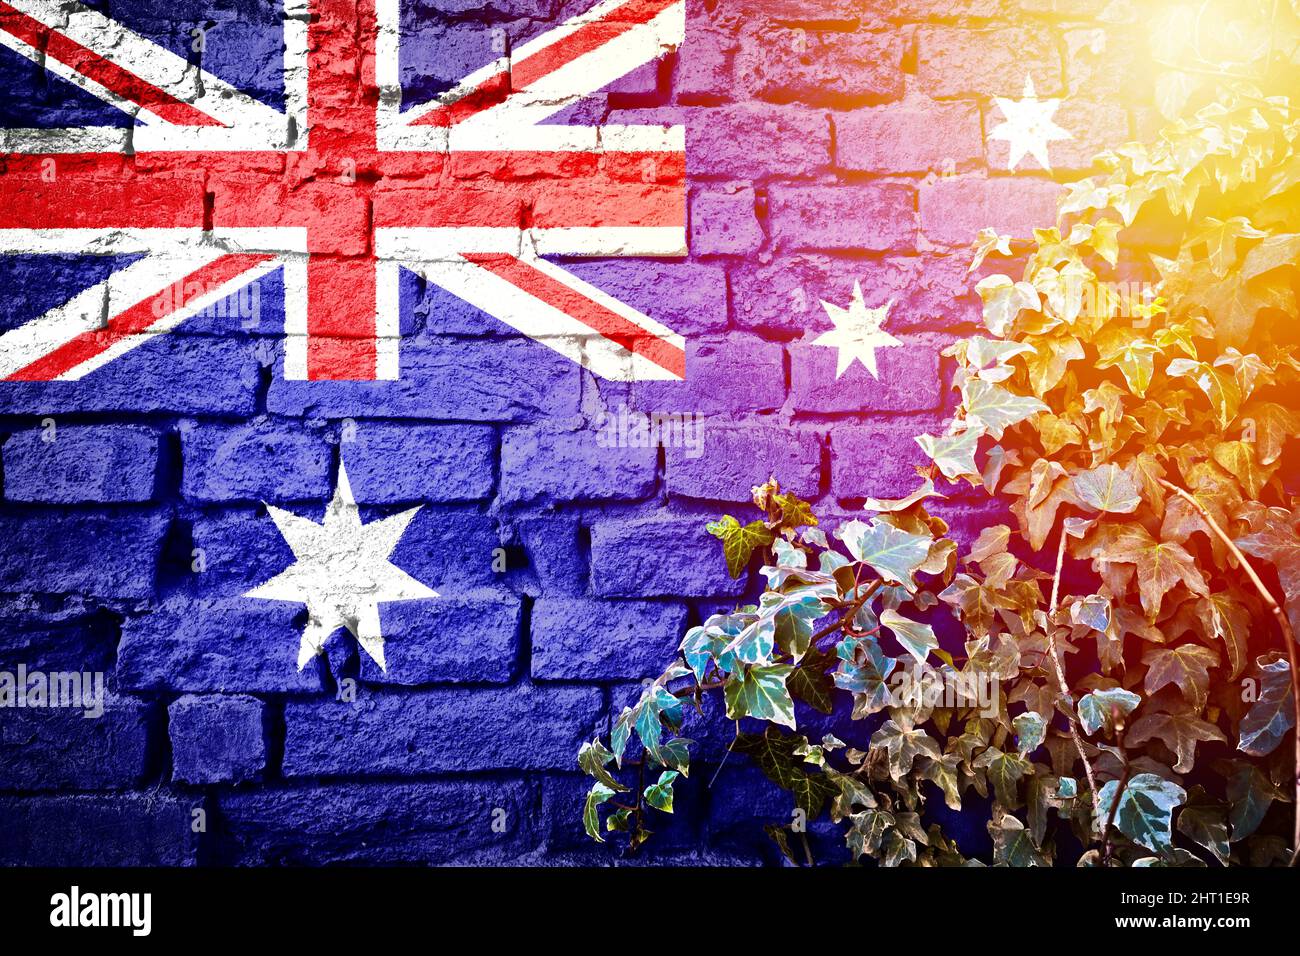 Australia grunge flag on brick wall with ivy plant sun haze view, country symbol concept Stock Photo